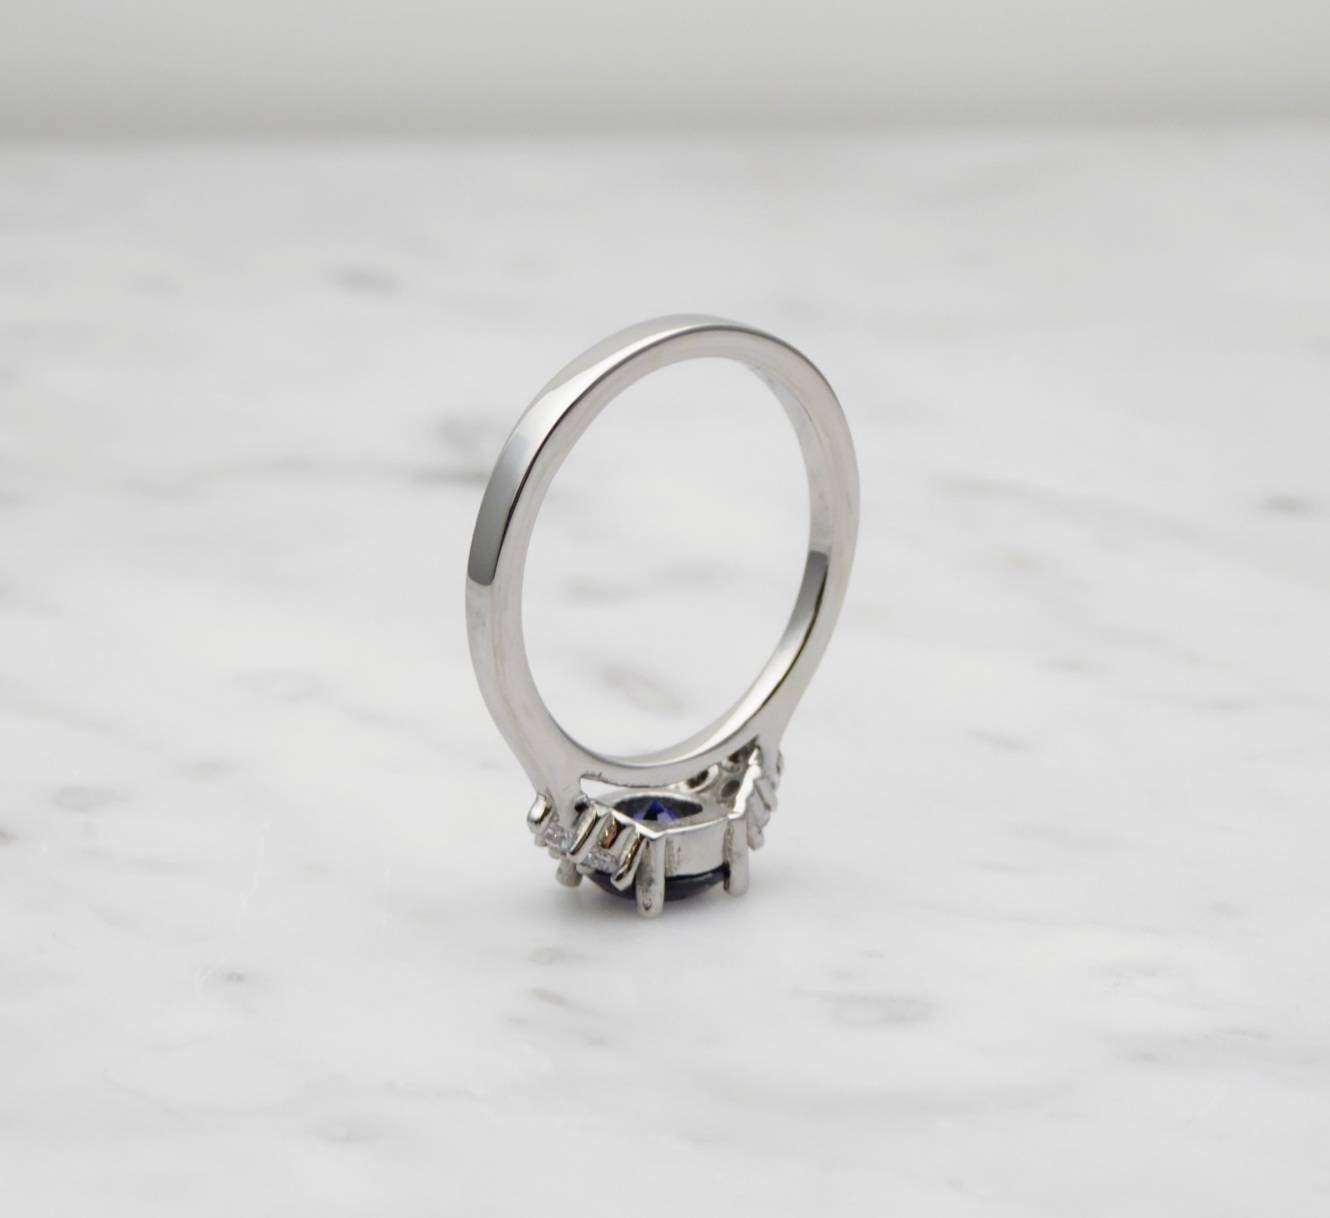 Blue Sapphire & Man Made Diamond Simulant ring available in white gold or Titanium - engagement ring - wedding ring